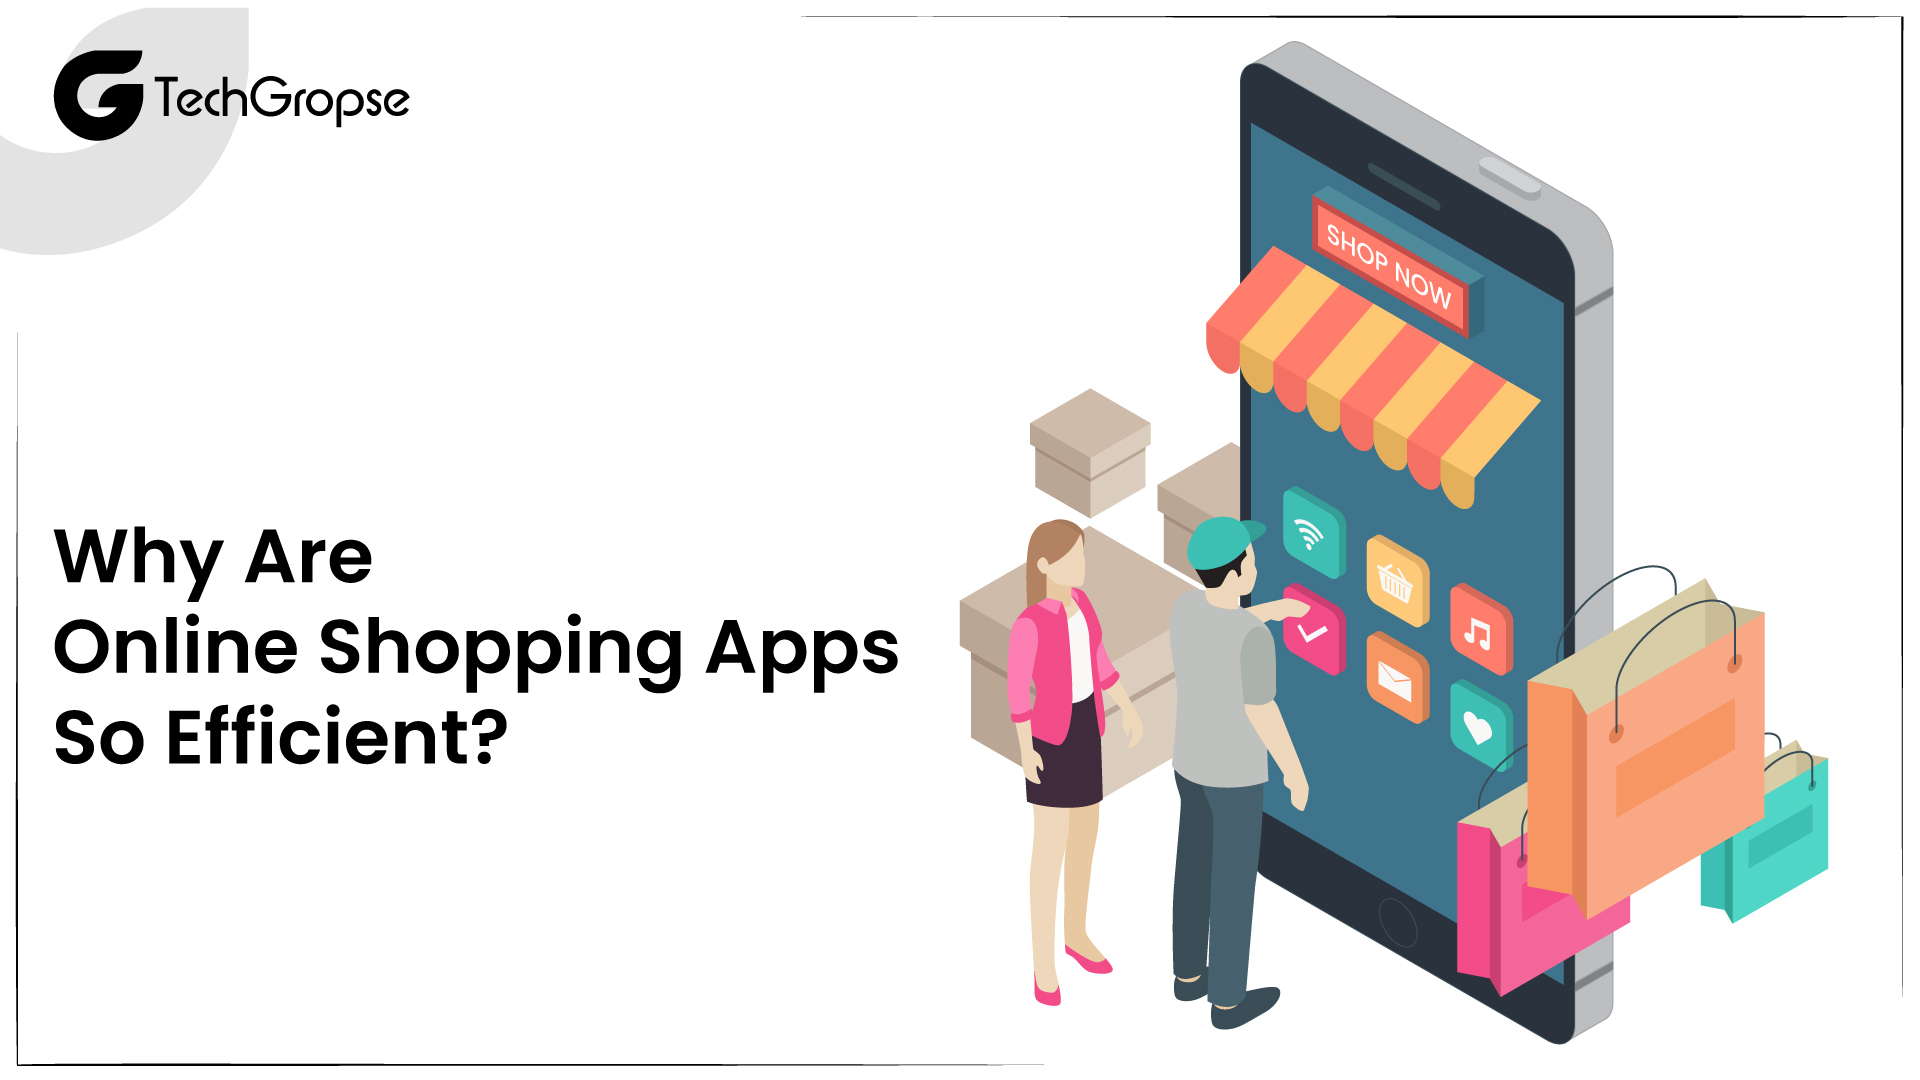 Why Are Online Shopping Apps So Efficient?